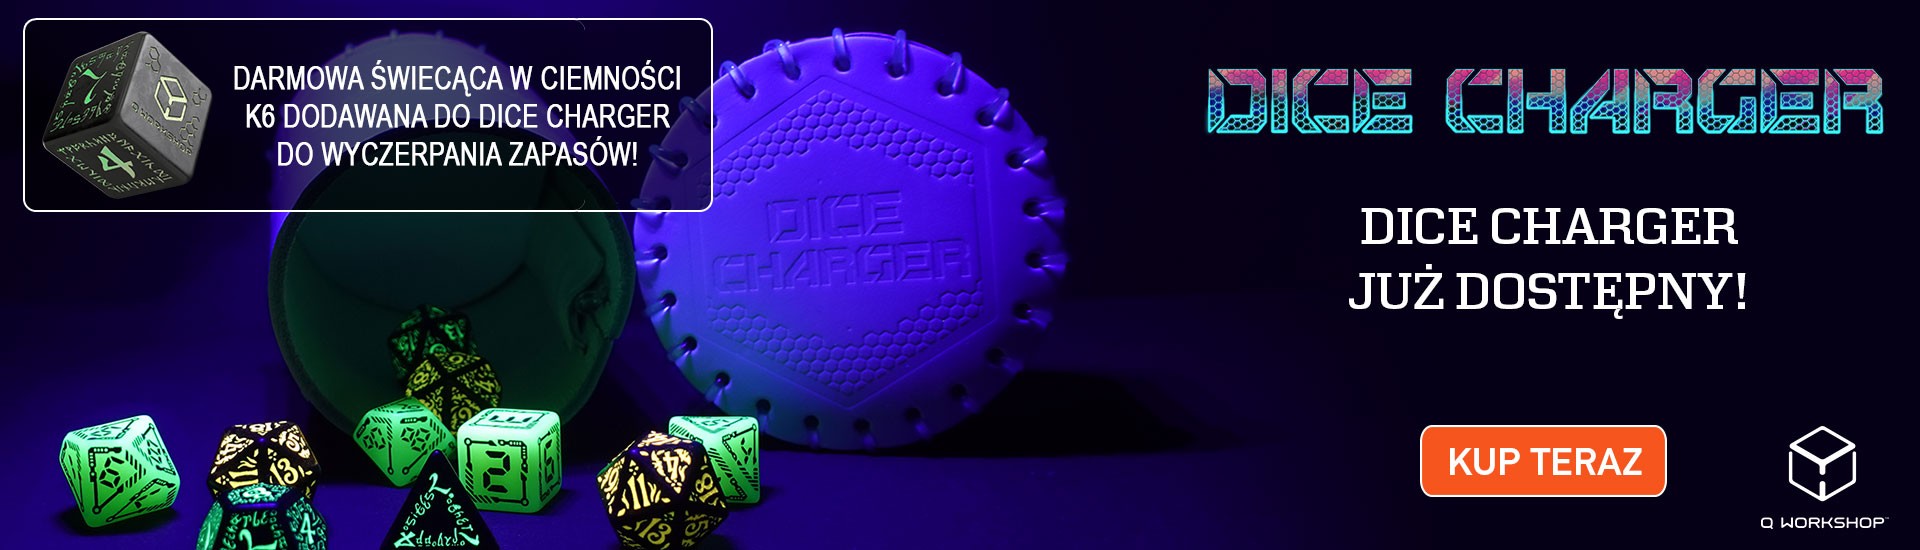 Dice Charger